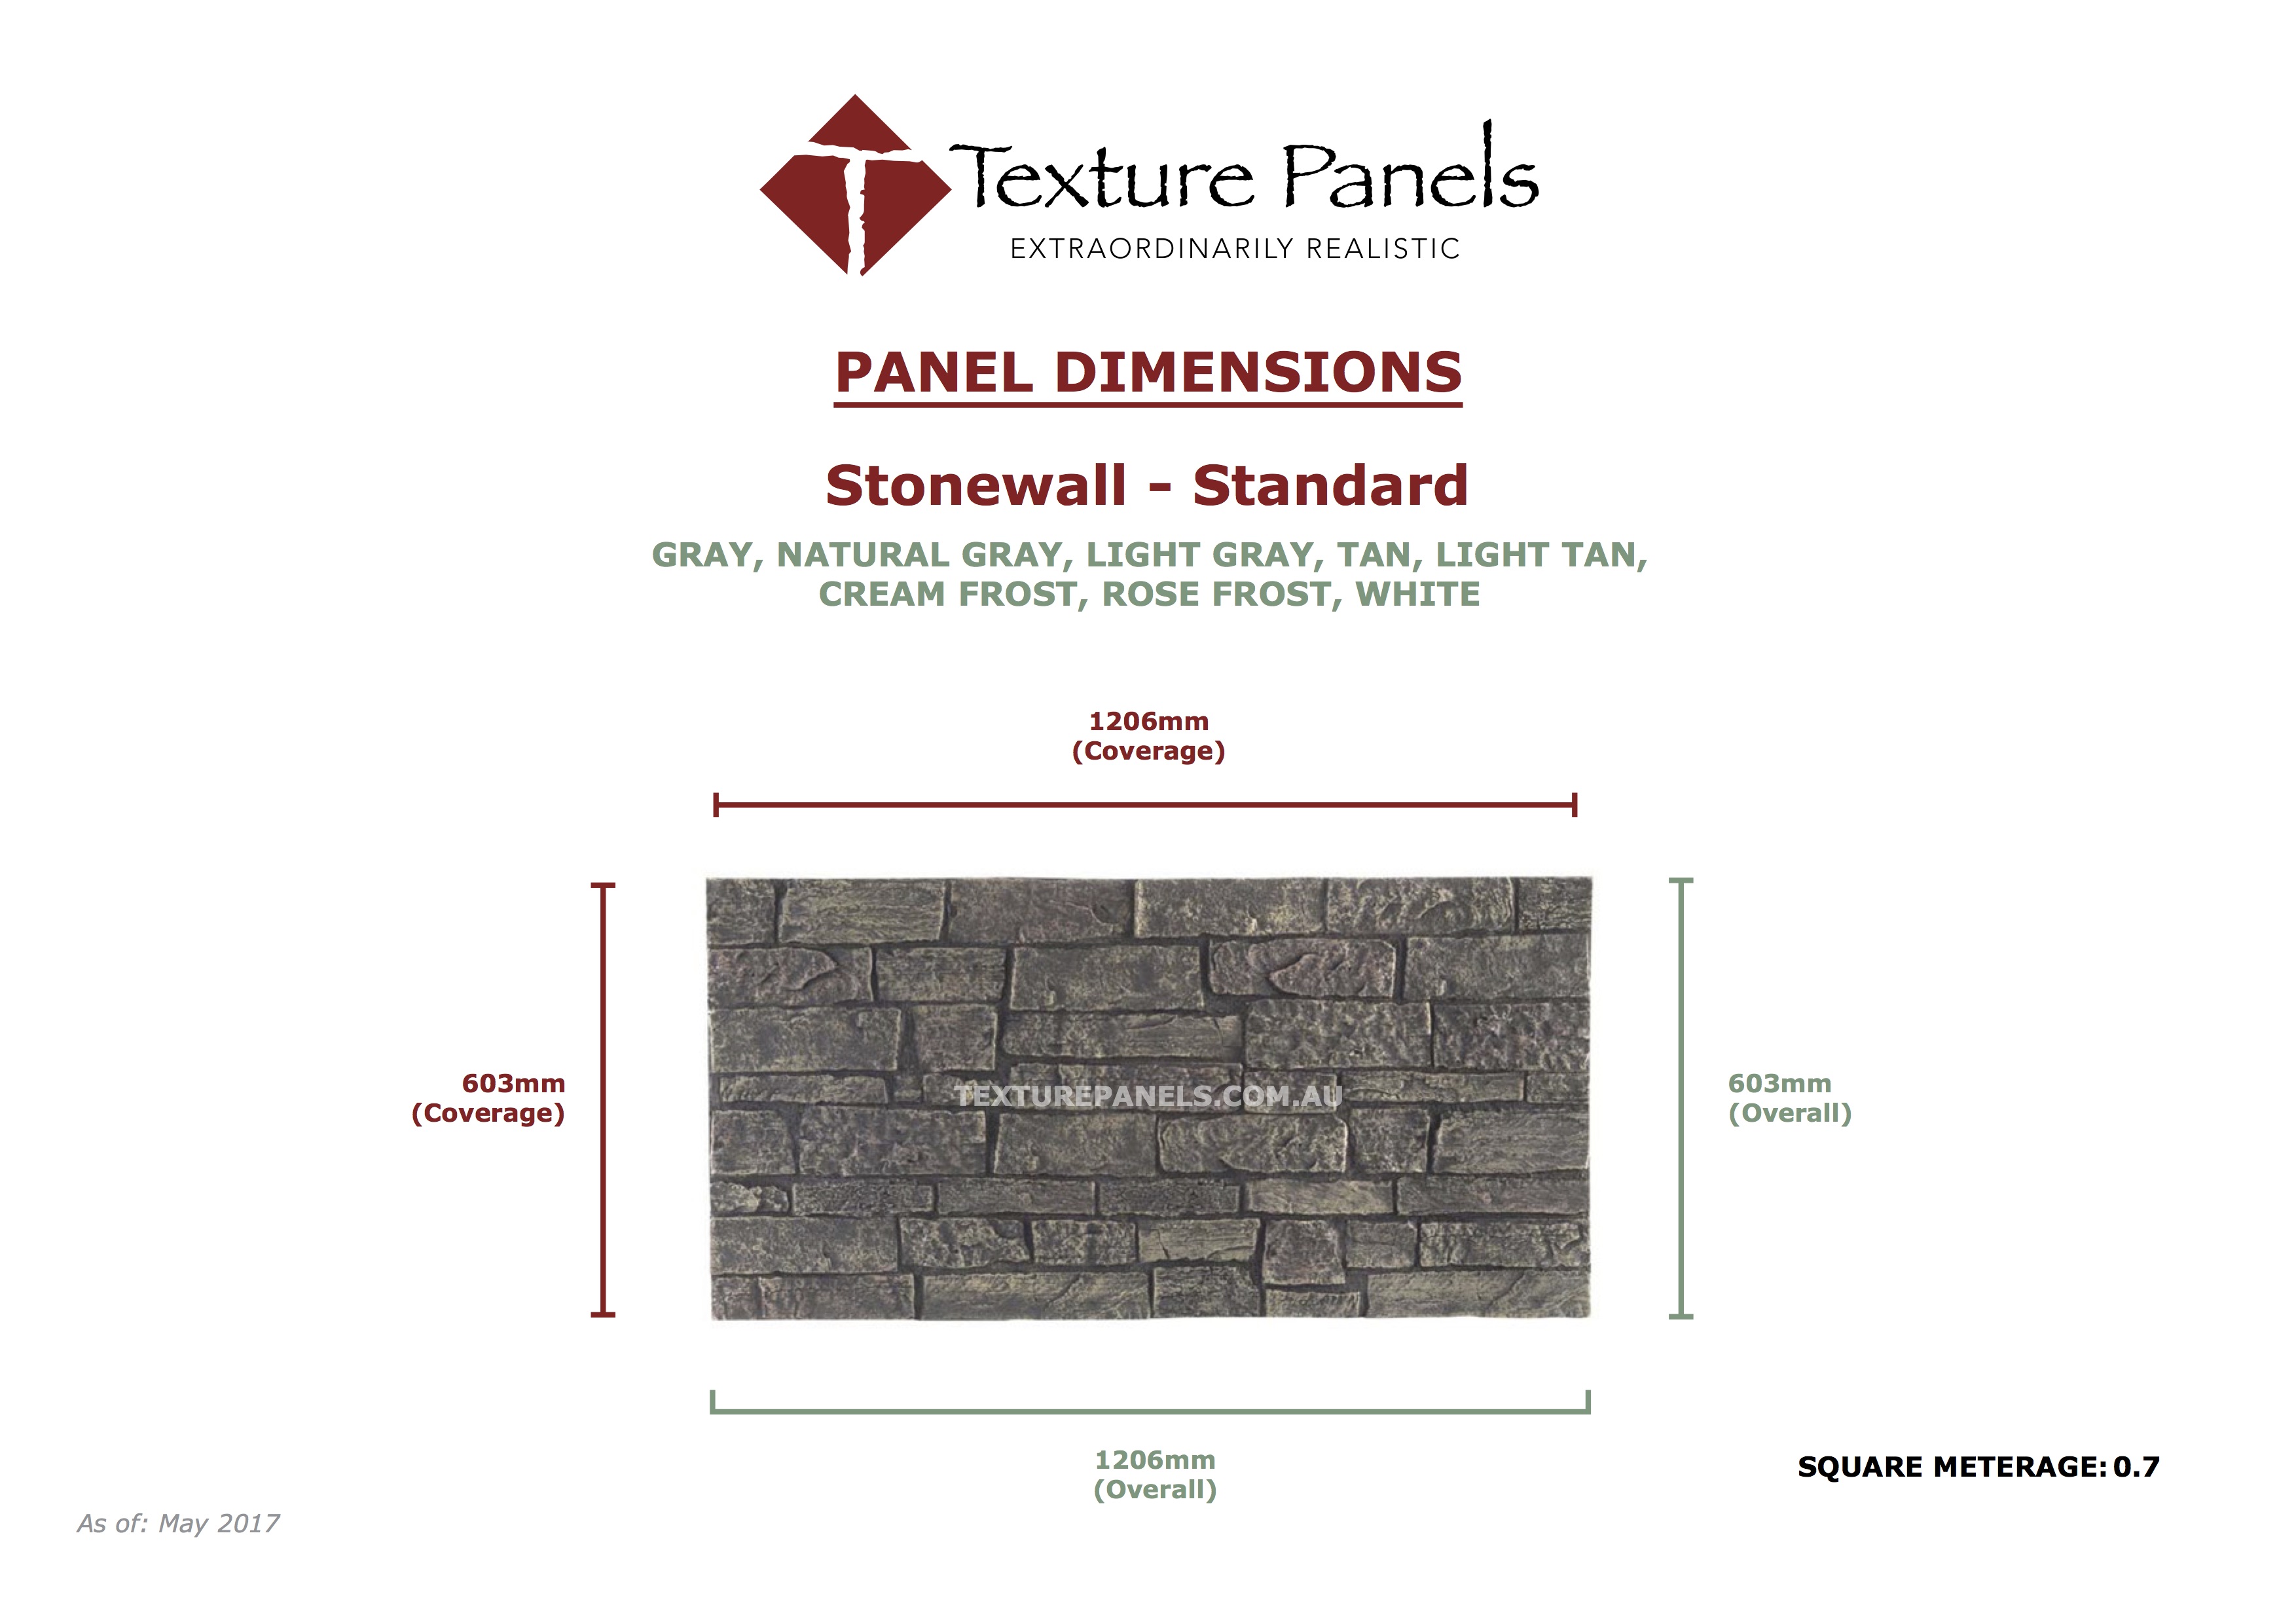 Stonewall Faux Wall Panels Dimensions